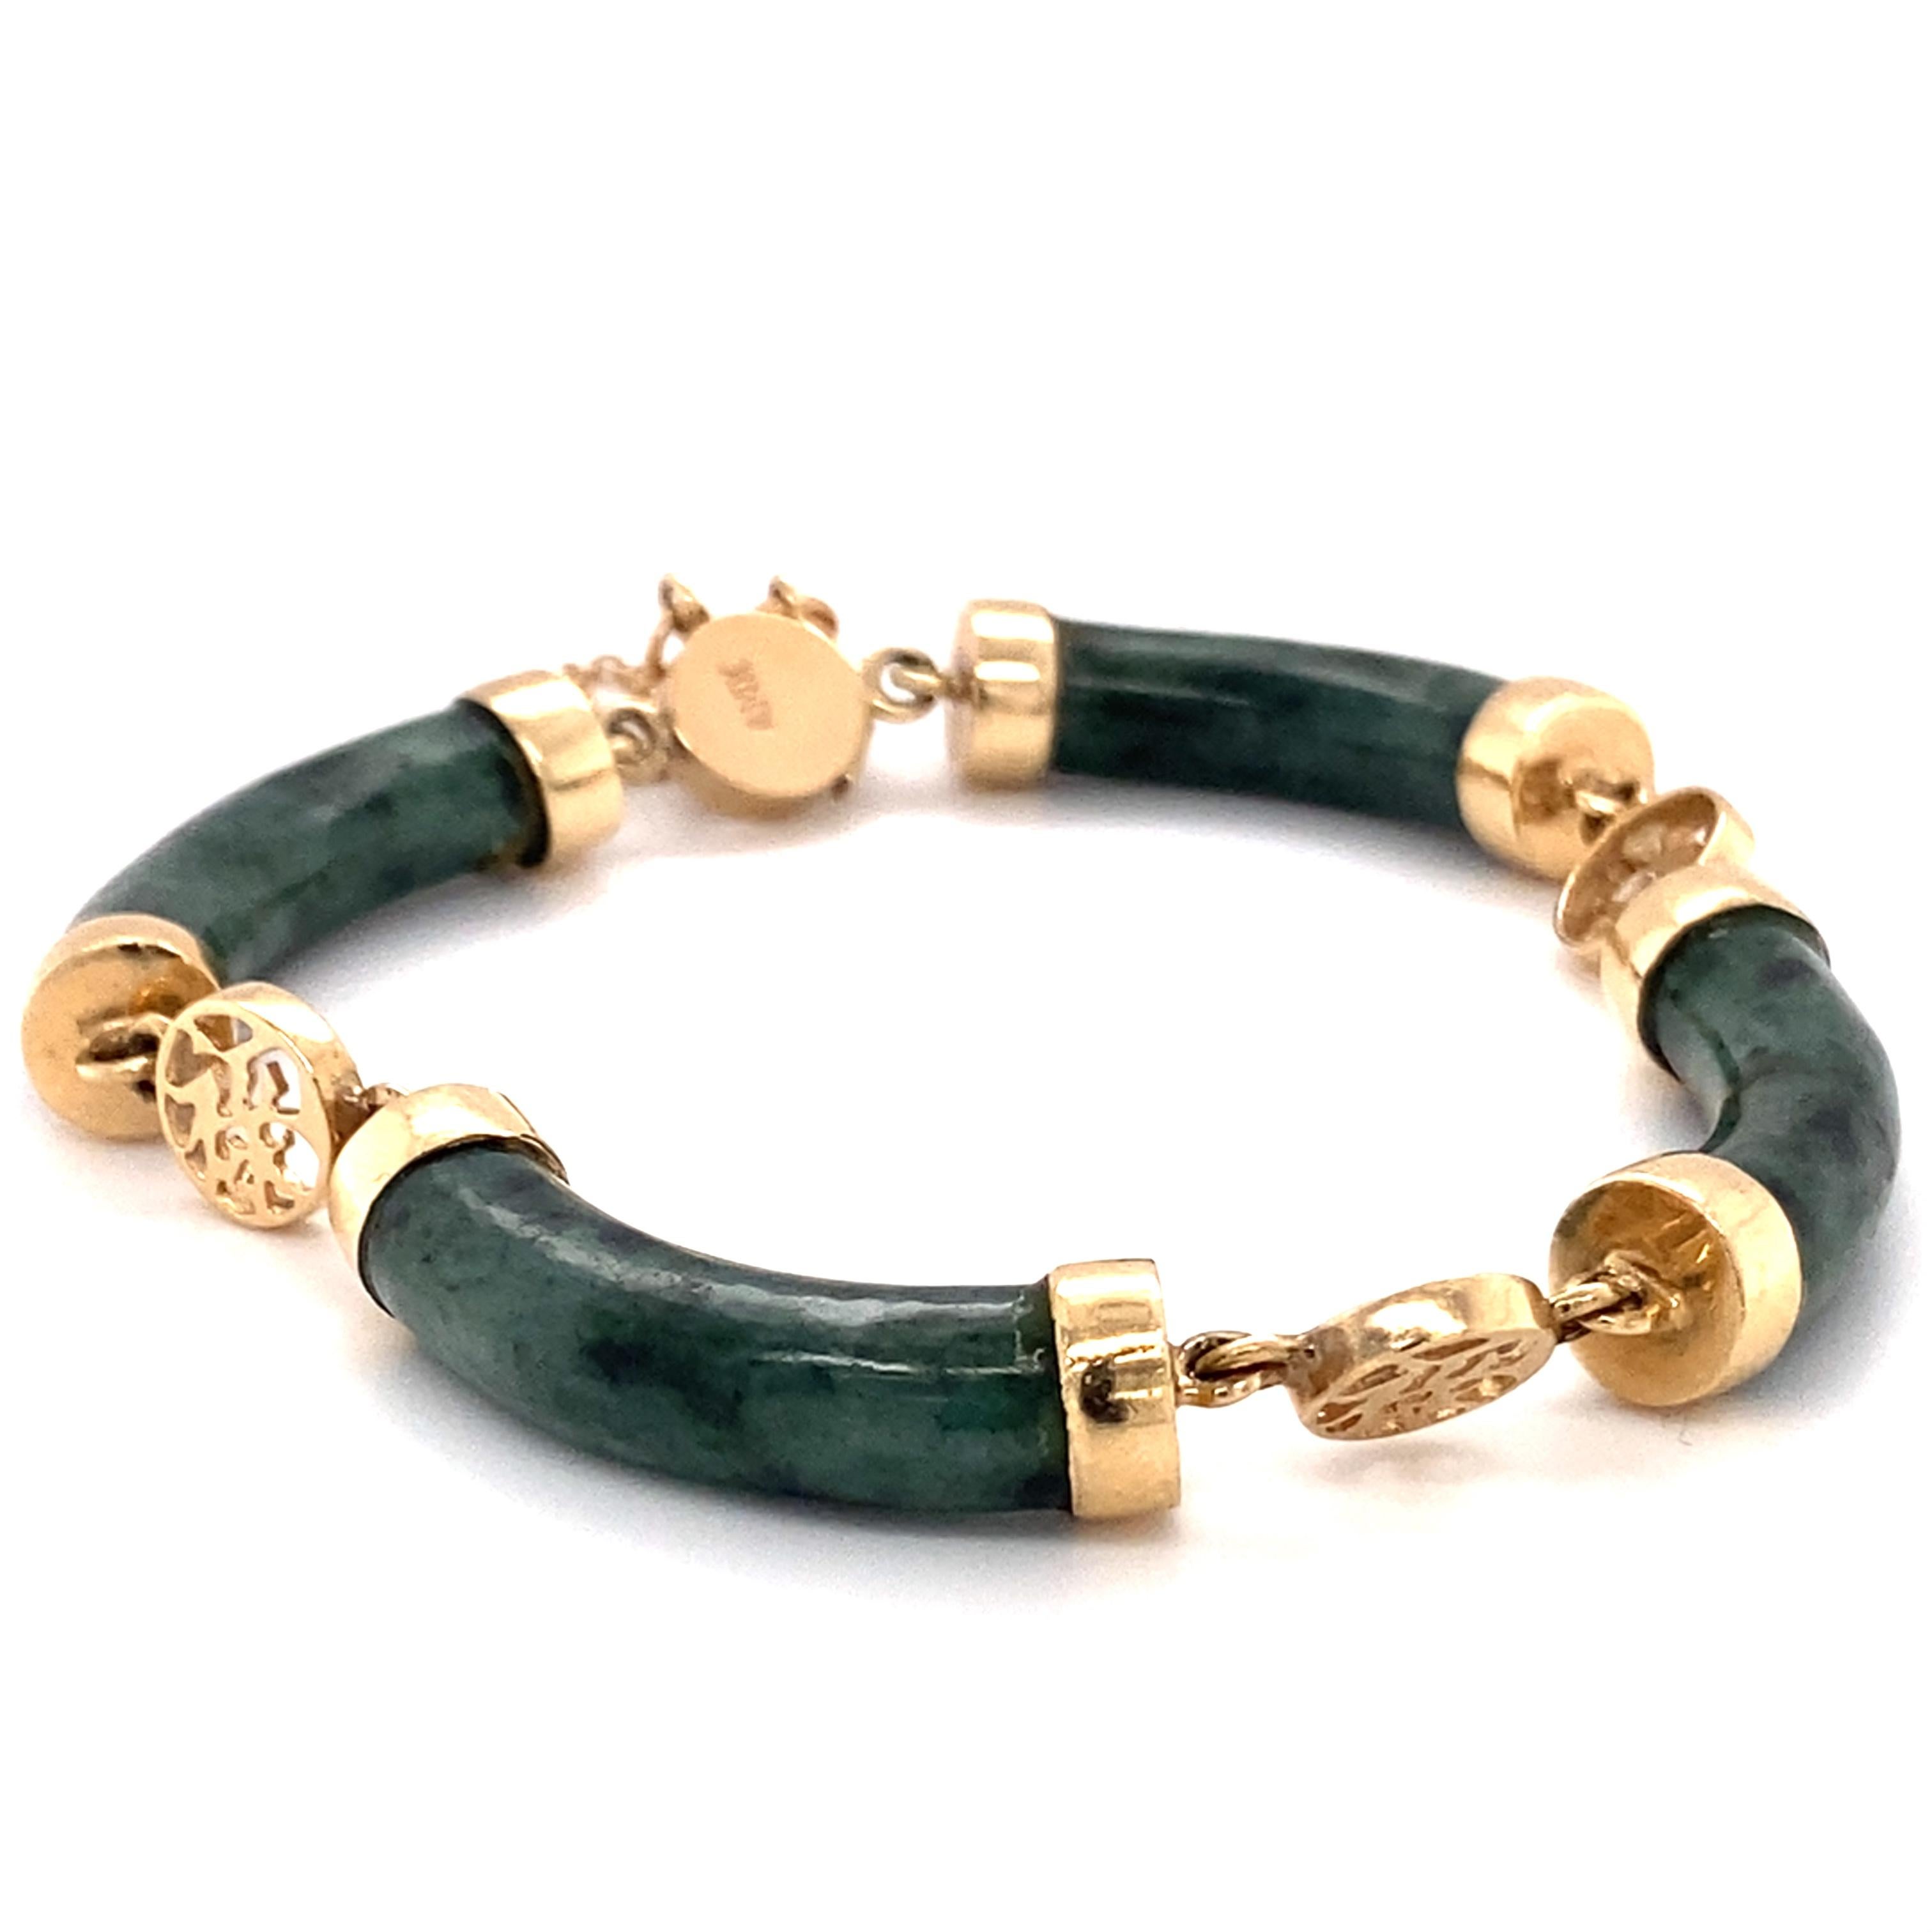 Item Features:
Gemstone: Jade
Metal: 14 Karat Yellow Gold
Weight: 22.2 grams
Measures: 7 inch Length

Item Details:
This beautiful bracelet made in 1960s features 4 carved pieces of green Jade segmented between 14 karat yellow gold charms with a